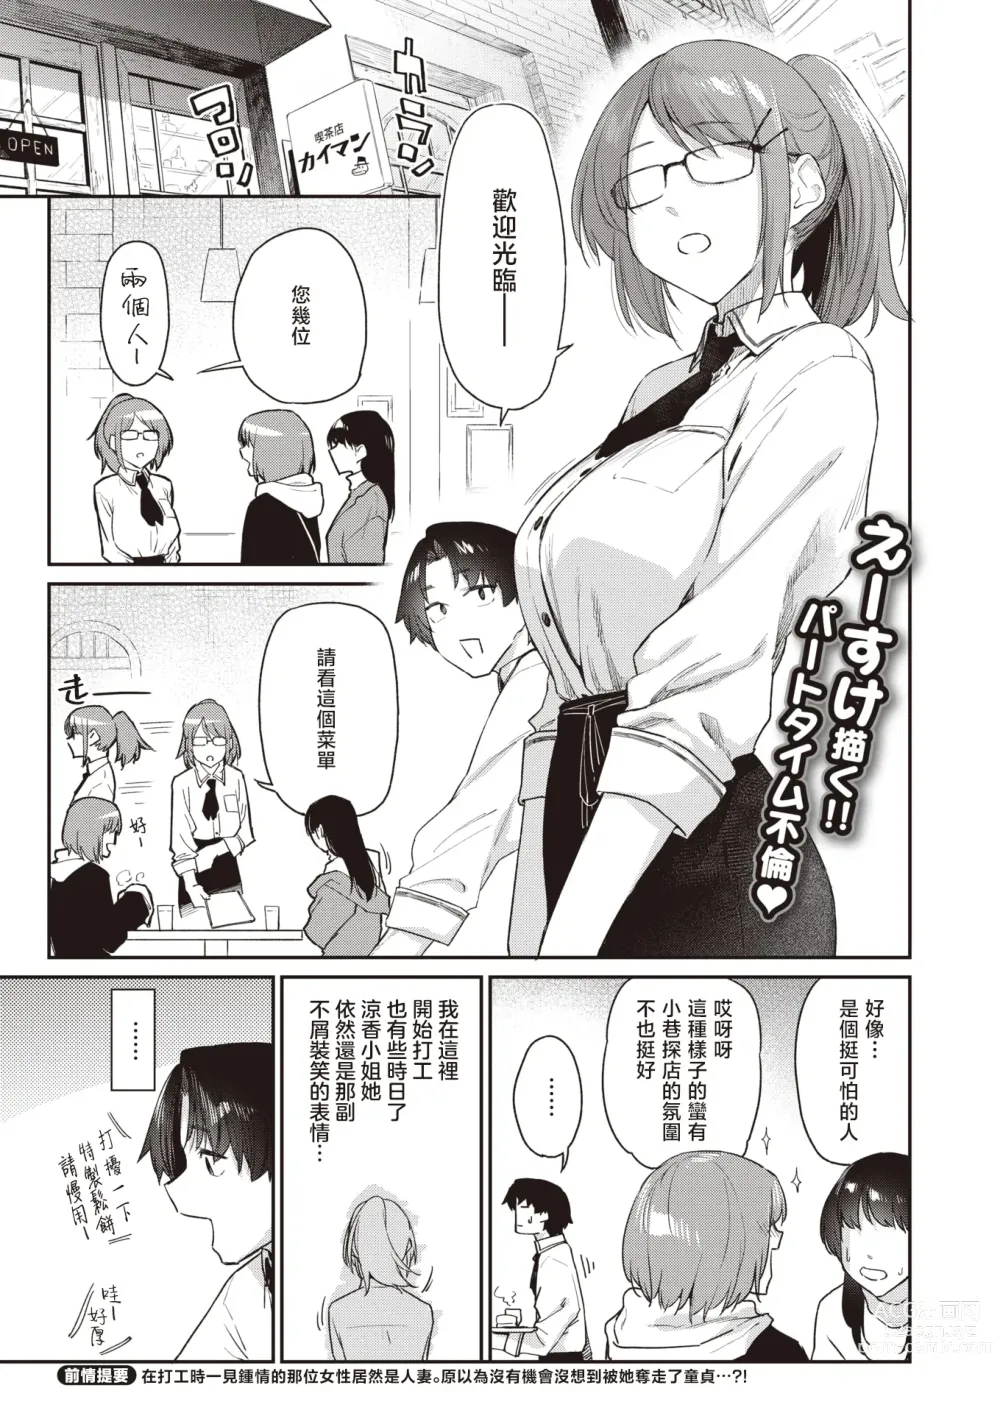 Page 1 of doujinshi 自用